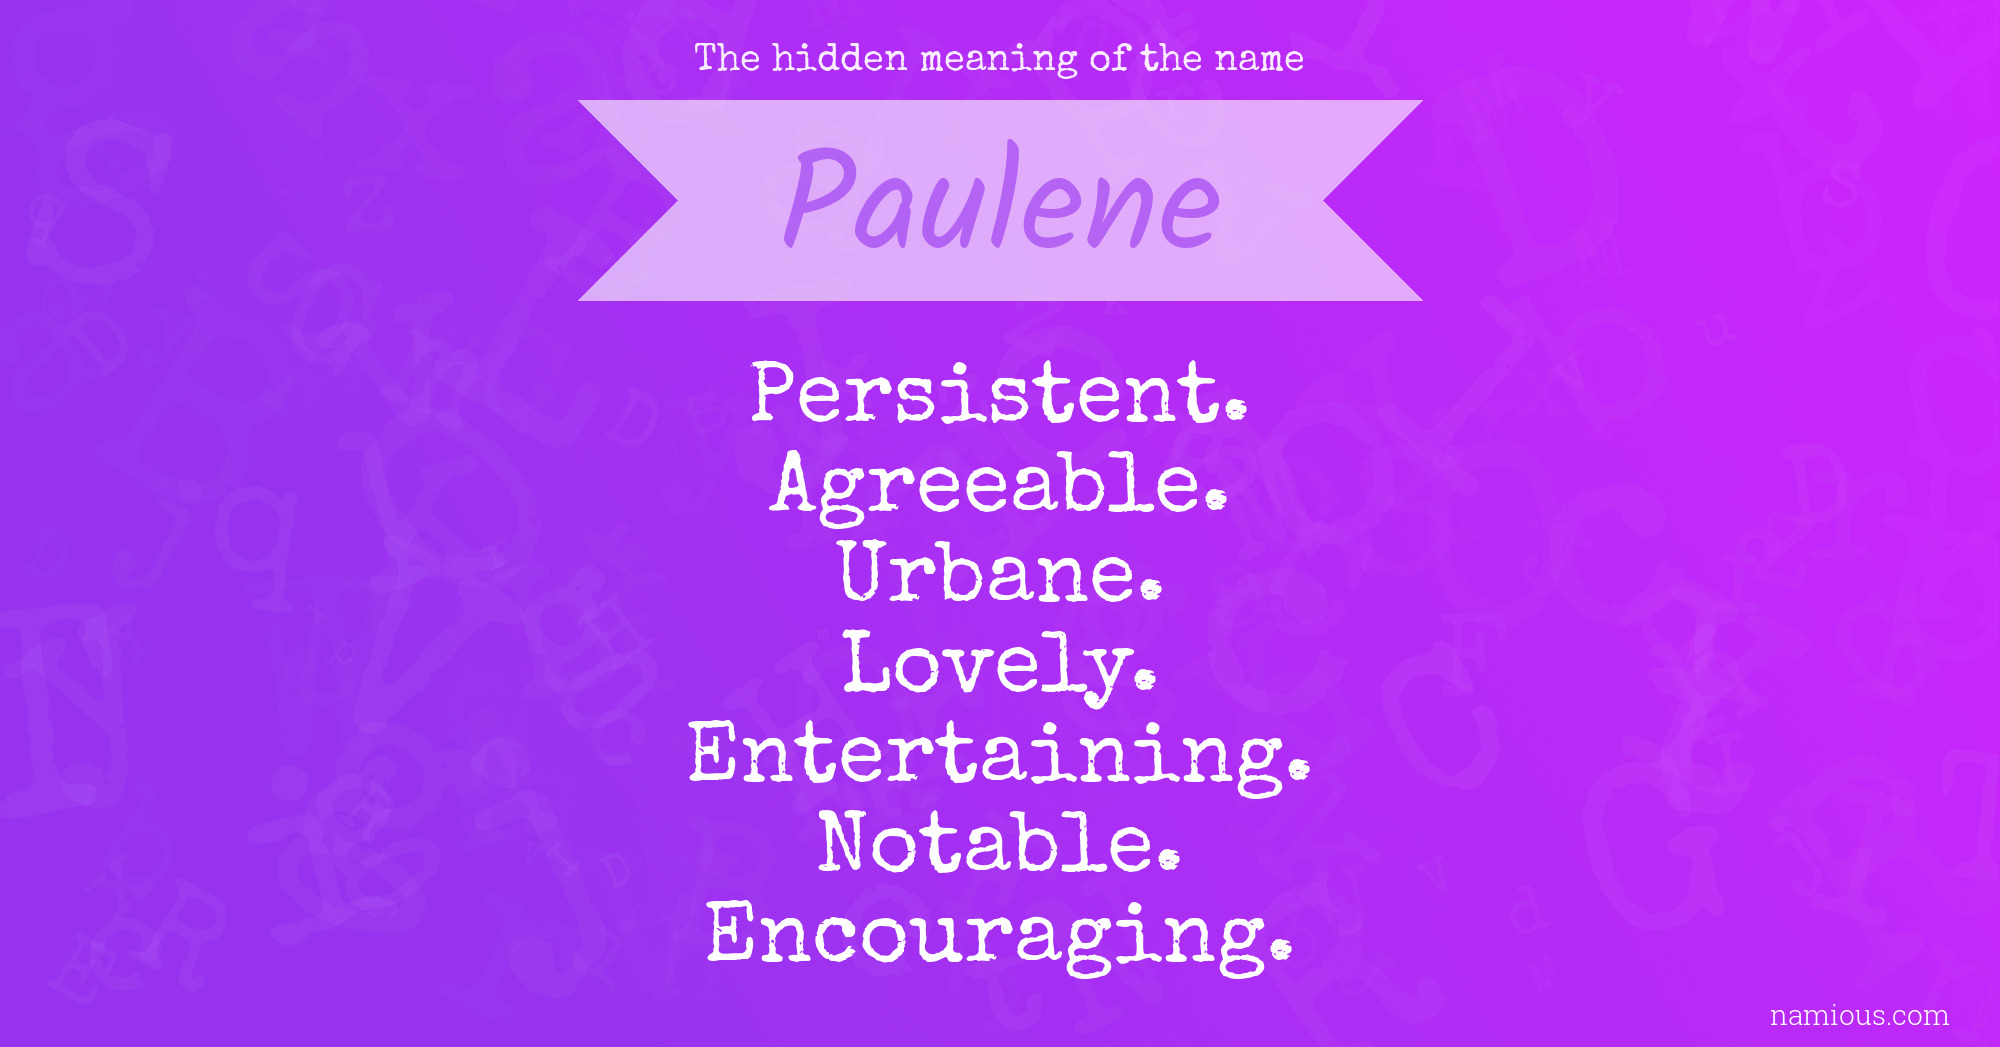 The hidden meaning of the name Paulene